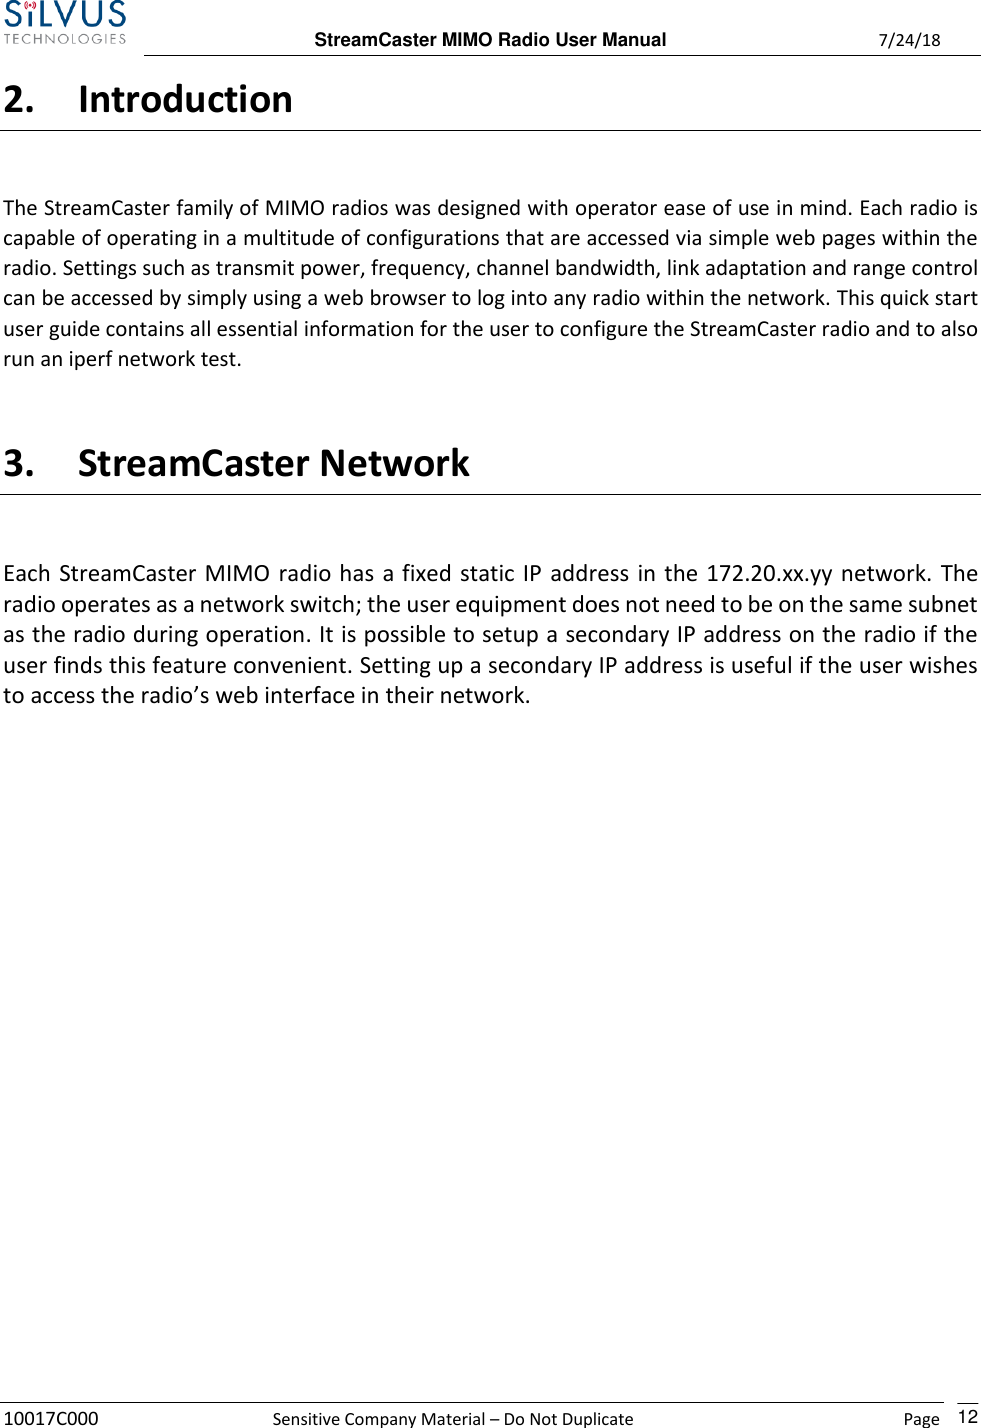  StreamCaster MIMO Radio User Manual  7/24/18 10017C000  Sensitive Company Material – Do Not Duplicate    Page    12 2. Introduction The StreamCaster family of MIMO radios was designed with operator ease of use in mind. Each radio is capable of operating in a multitude of configurations that are accessed via simple web pages within the radio. Settings such as transmit power, frequency, channel bandwidth, link adaptation and range control can be accessed by simply using a web browser to log into any radio within the network. This quick start user guide contains all essential information for the user to configure the StreamCaster radio and to also run an iperf network test.  3. StreamCaster Network Each StreamCaster MIMO radio has a fixed static IP address in the 172.20.xx.yy network. The radio operates as a network switch; the user equipment does not need to be on the same subnet as the radio during operation. It is possible to setup a secondary IP address on the radio if the user finds this feature convenient. Setting up a secondary IP address is useful if the user wishes to access the radio’s web interface in their network.            